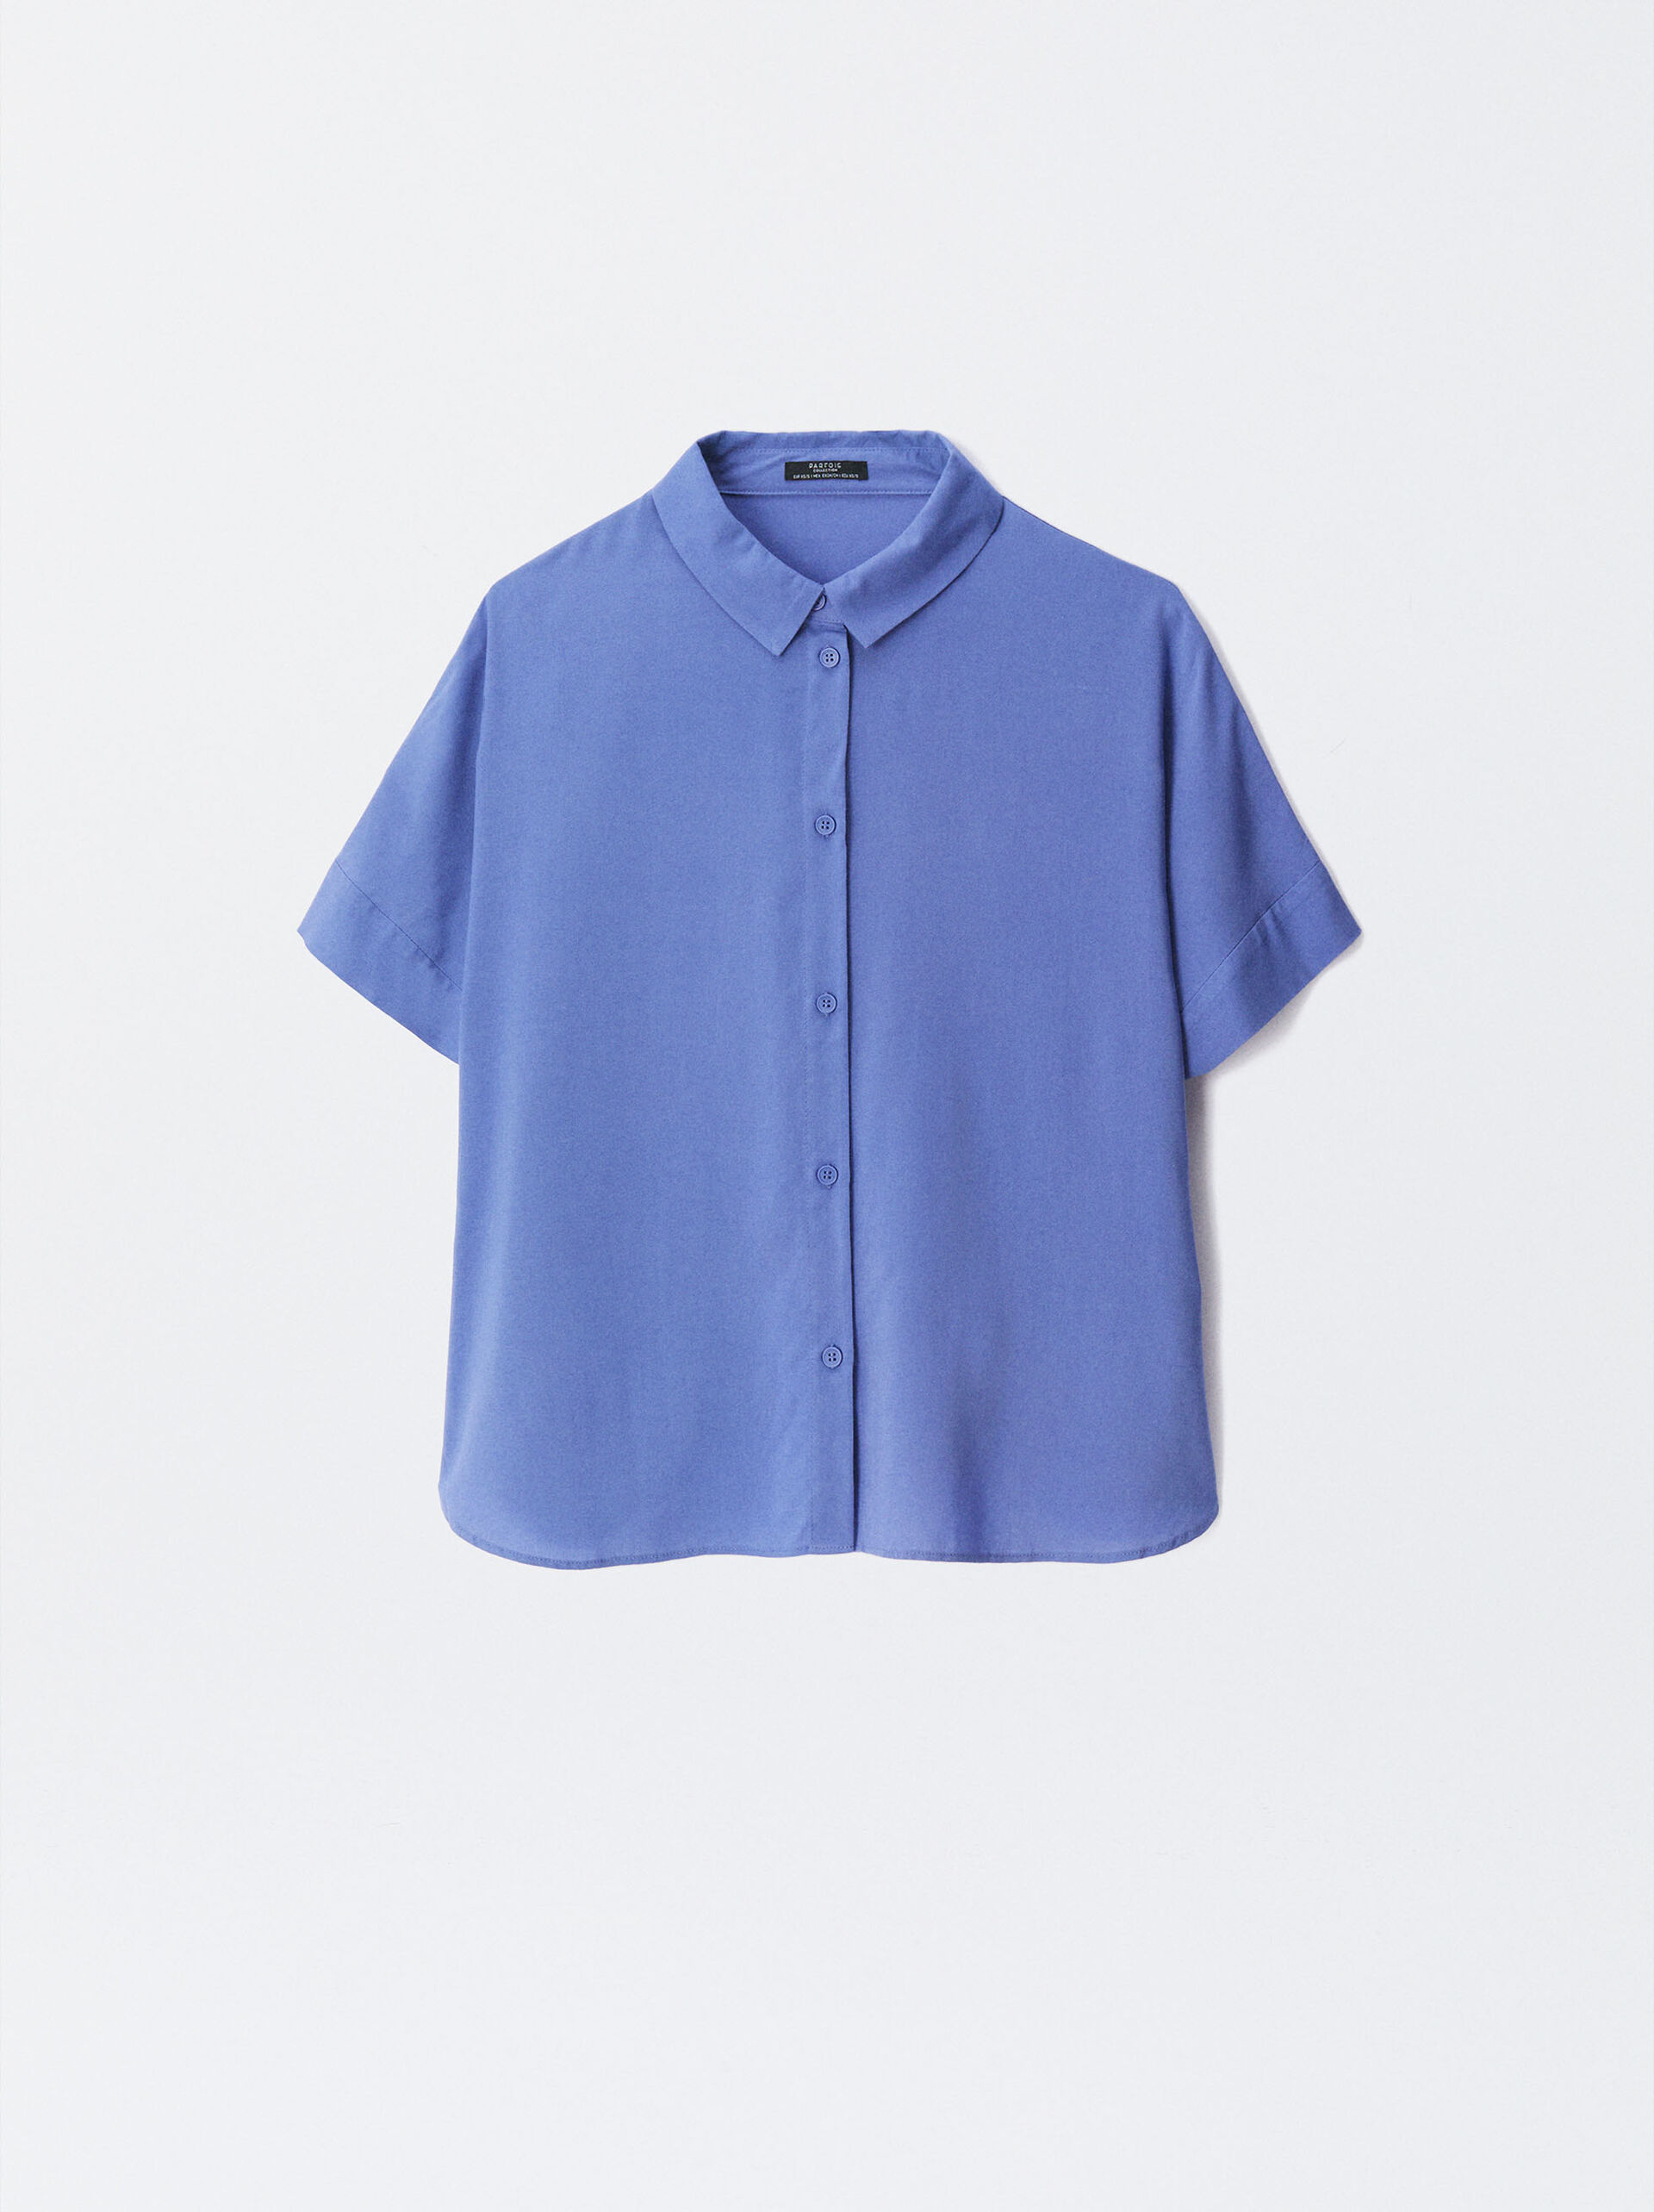 Short-Sleeved Shirt With Buttons image number 5.0